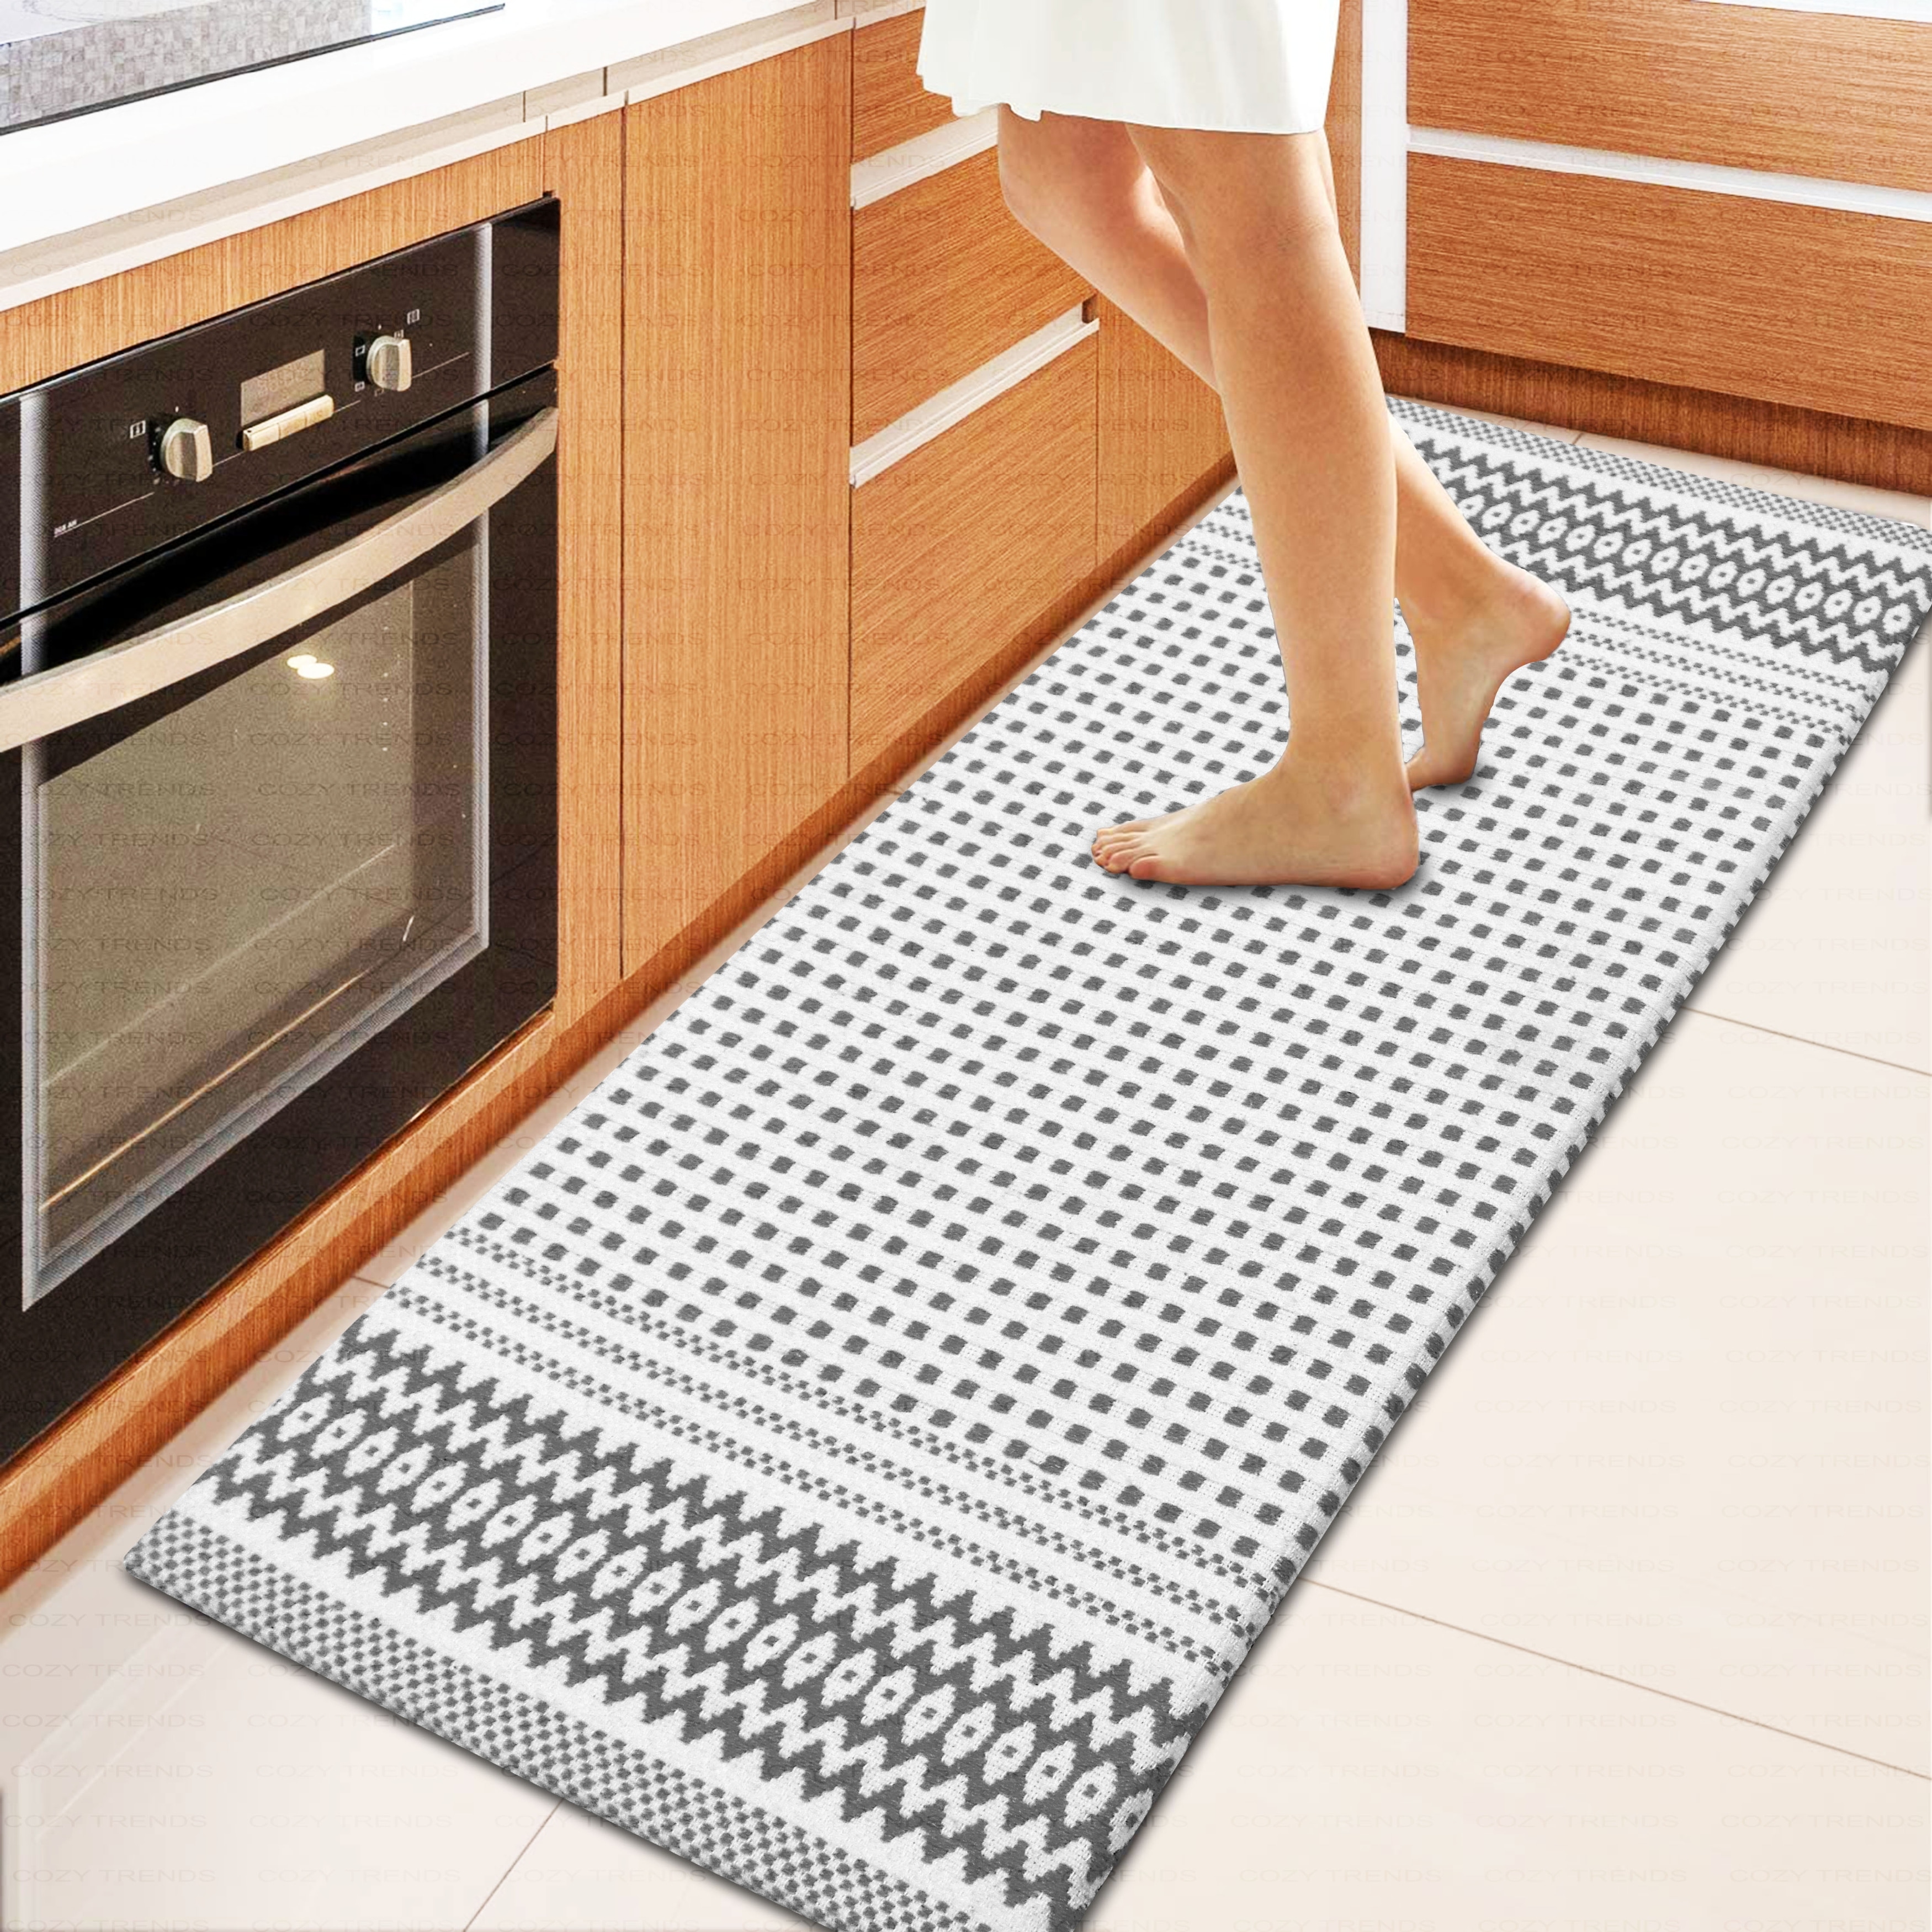 https://ak1.ostkcdn.com/images/products/is/images/direct/43ddfc7800aa274c71f071c4fe37d670be5f81c1/Kitchen-Runner-Rug--Mat-Cushioned-Cotton-Hand-Woven-Anti-Fatigue-Mat-Kitchen-Bathroom-Bed-side-18x48%27%27.jpg